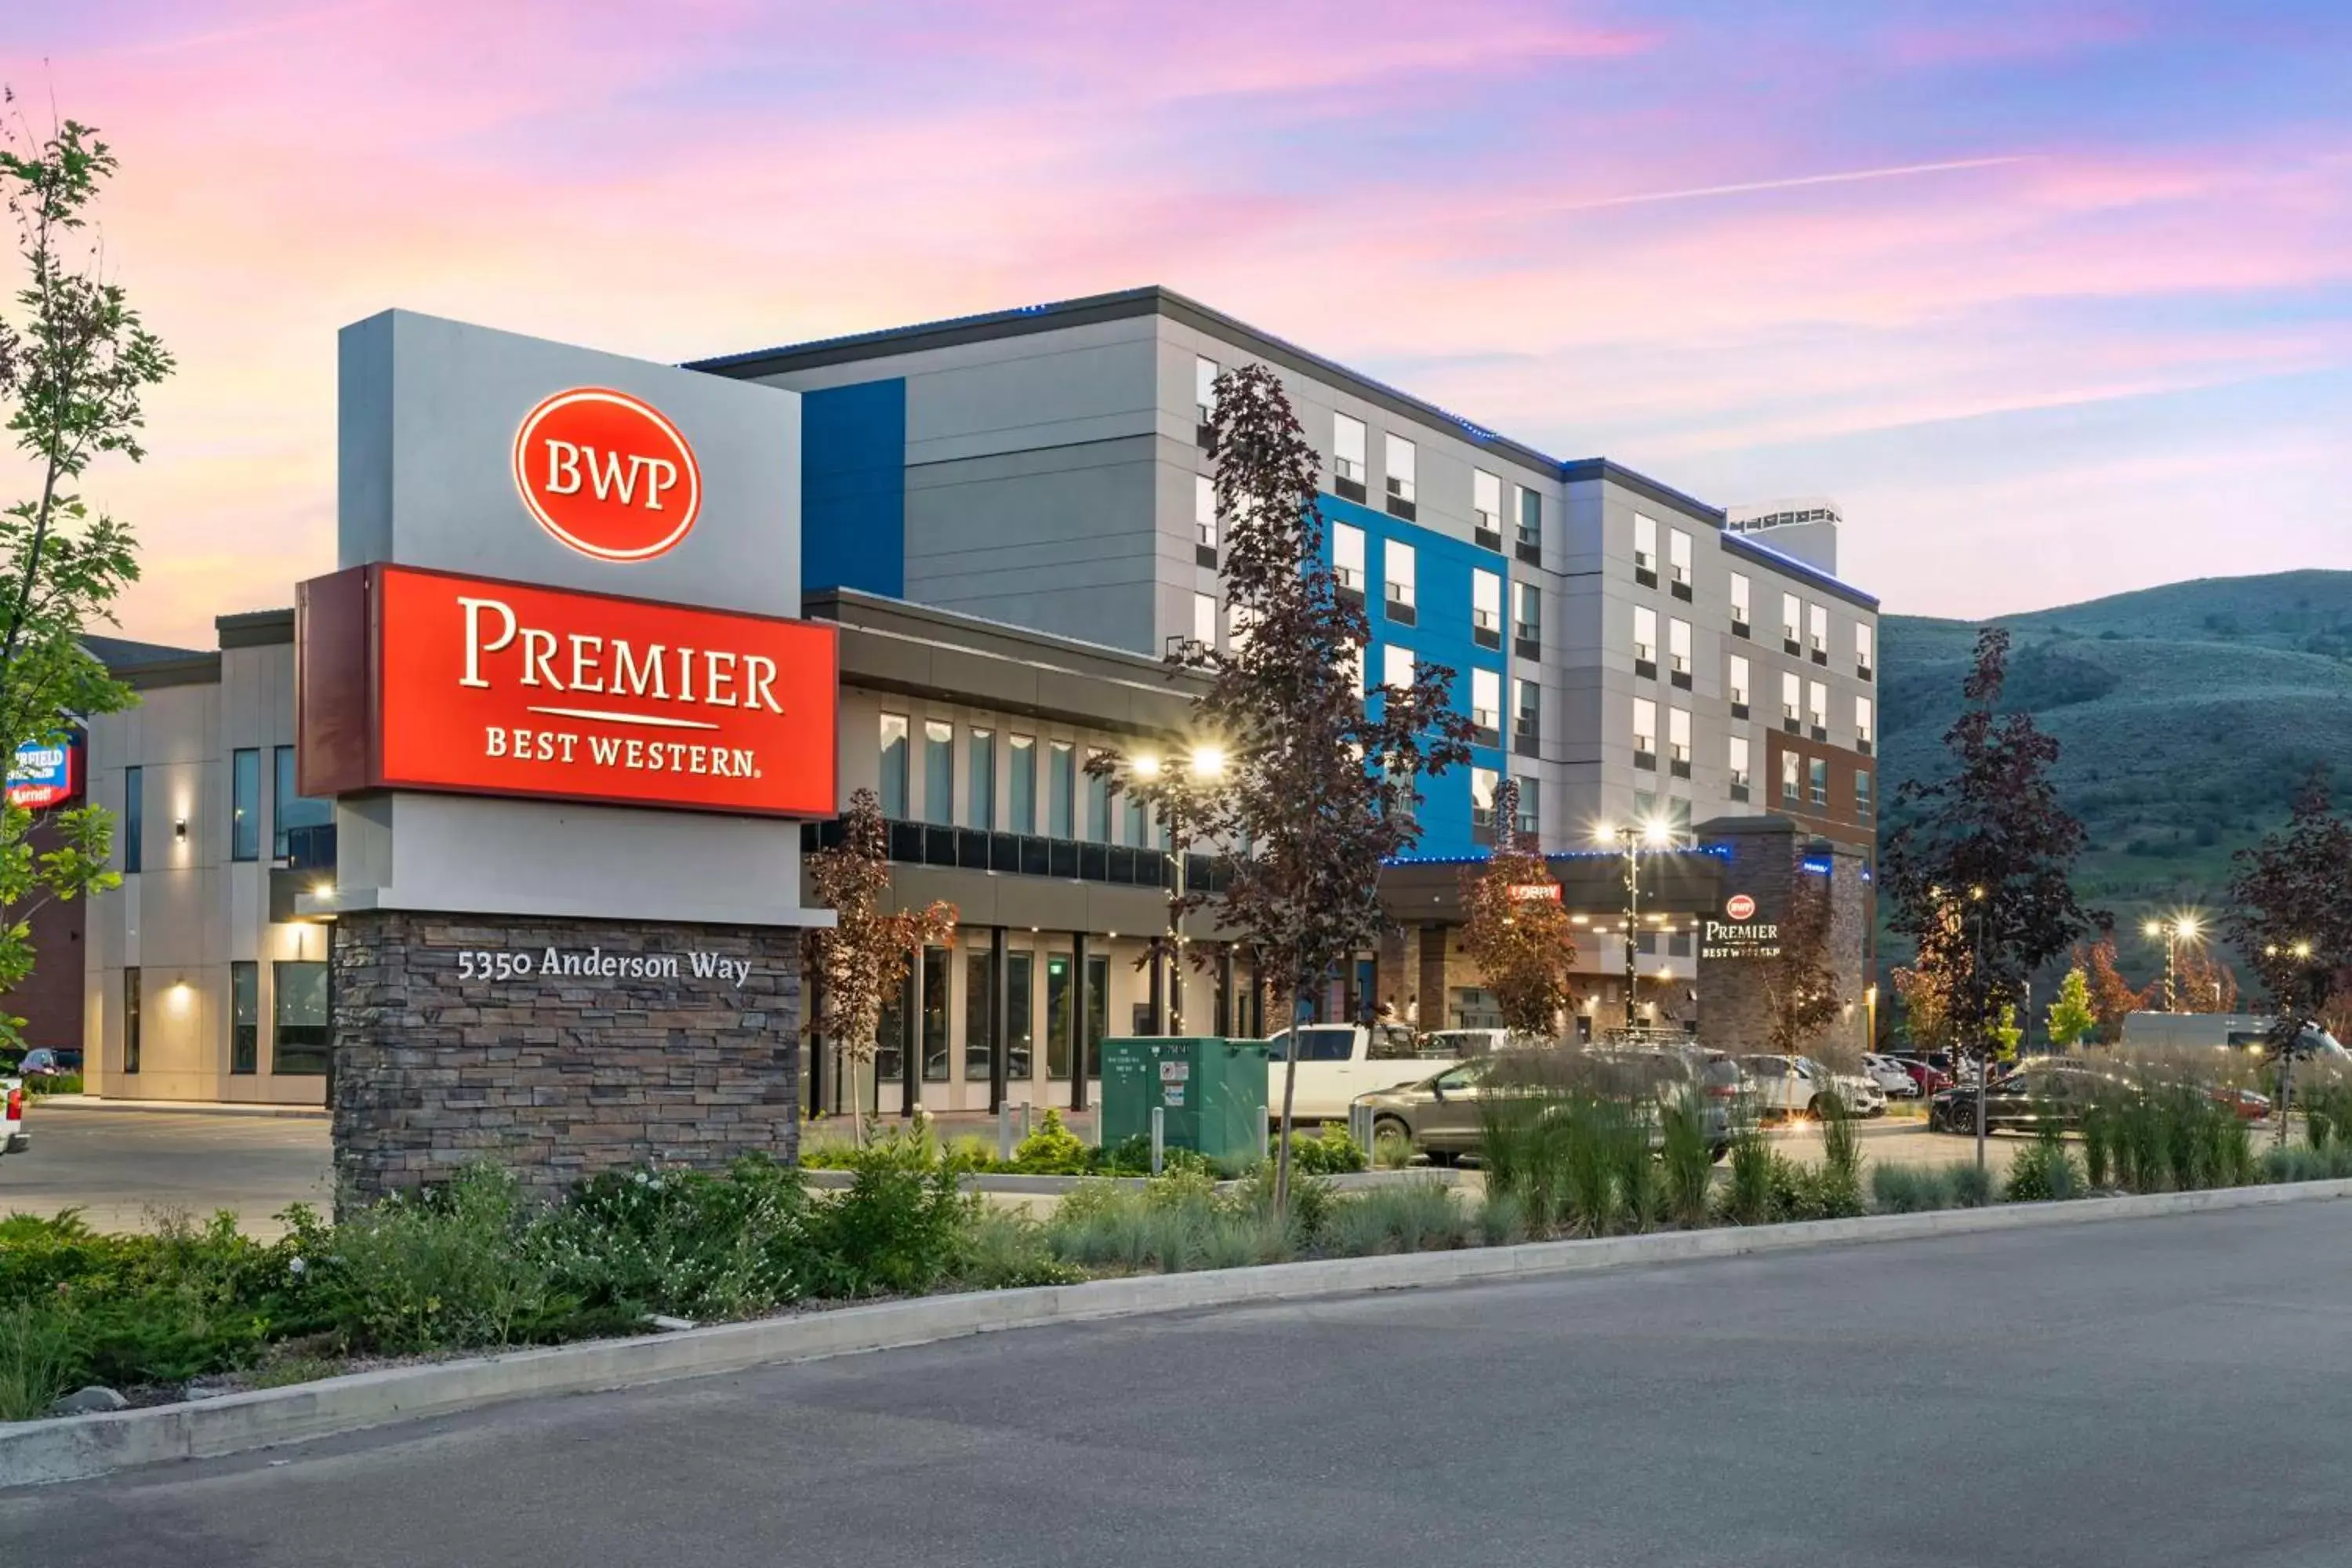 Property Building in Best Western Premier Route 97 Vernon